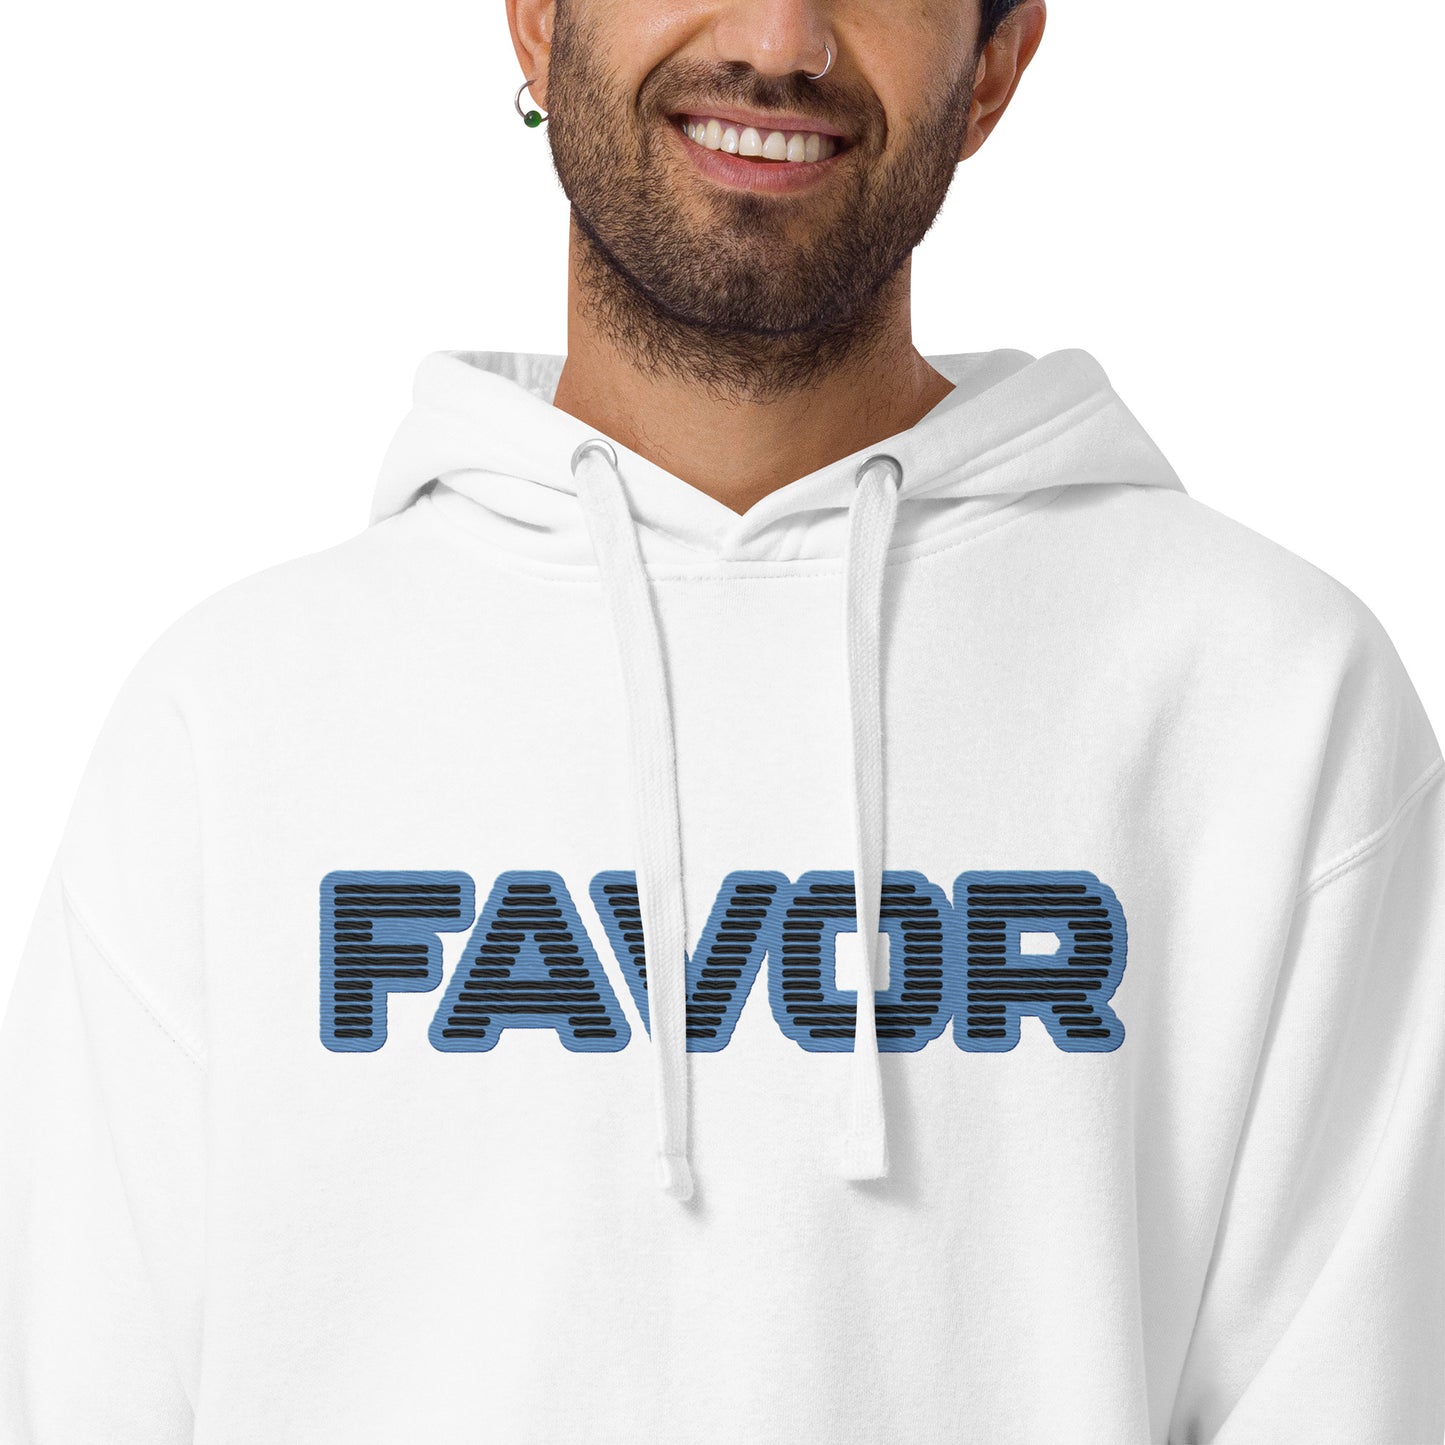 FAVOR- EMBROIDERED FRONT Unisex Hoodie